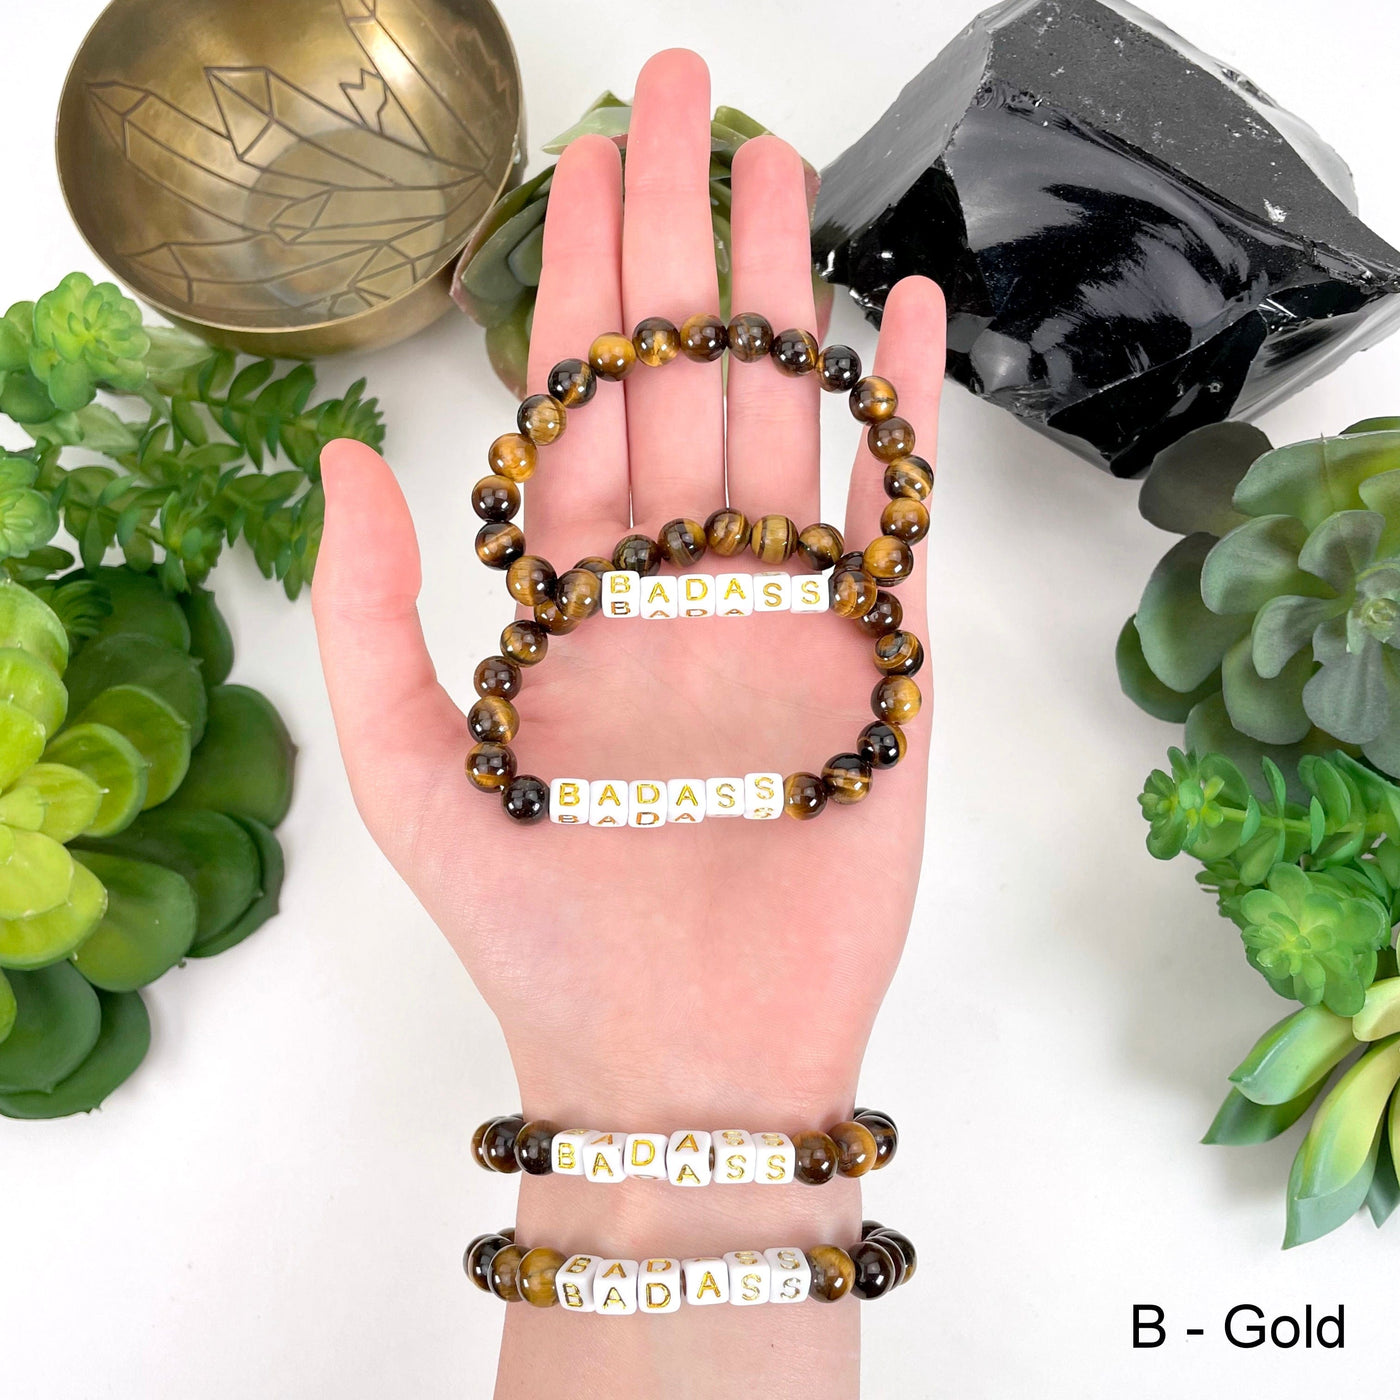 gold "BADASS" letter bead option in hand and on wrist for color reference